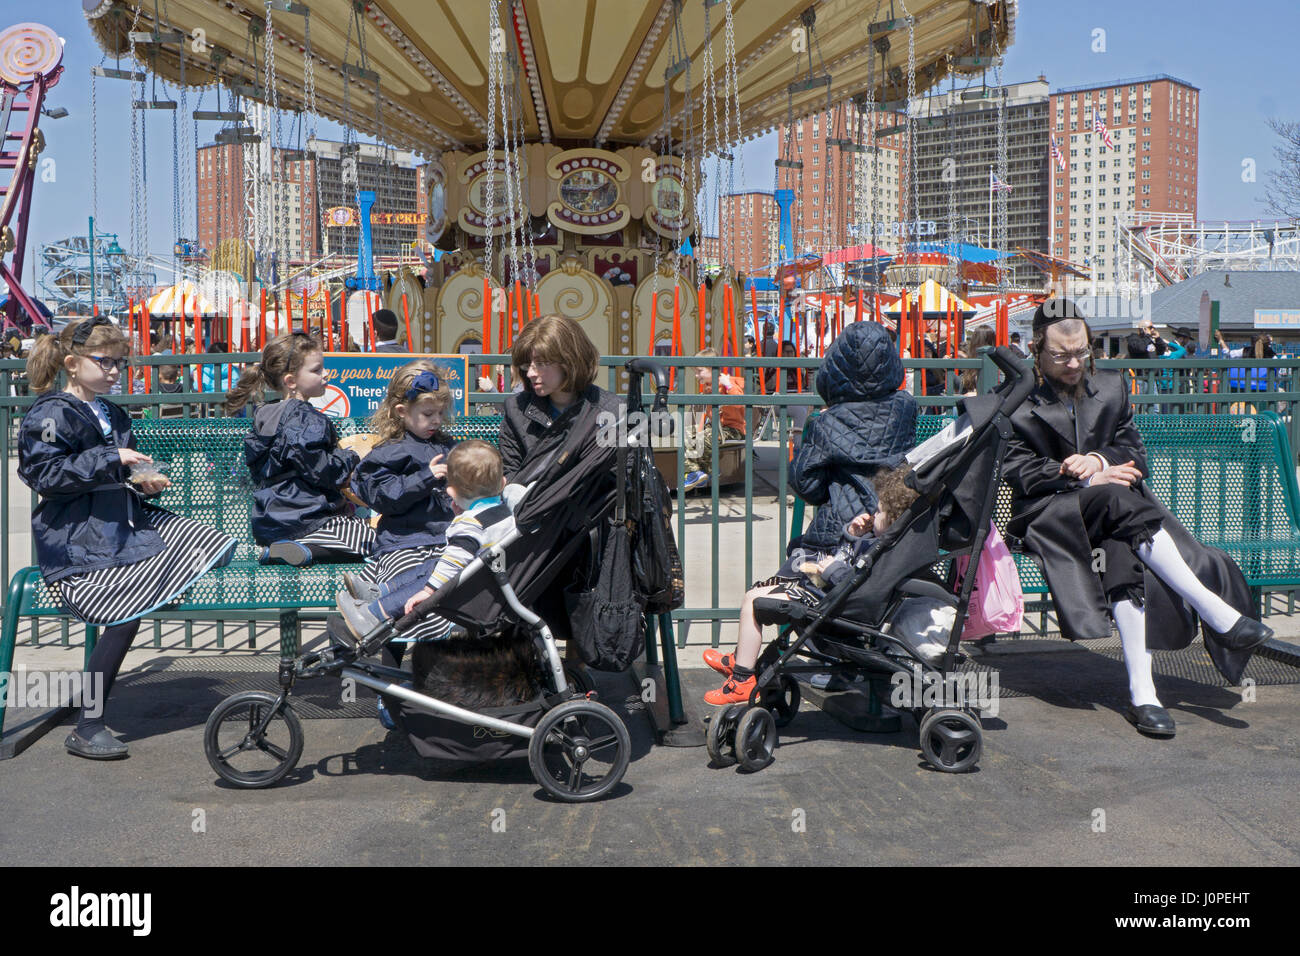 A religious Jewish family having fun during Passover at Luna Park in Coney Island, Brooklyn,, New York City. Stock Photo